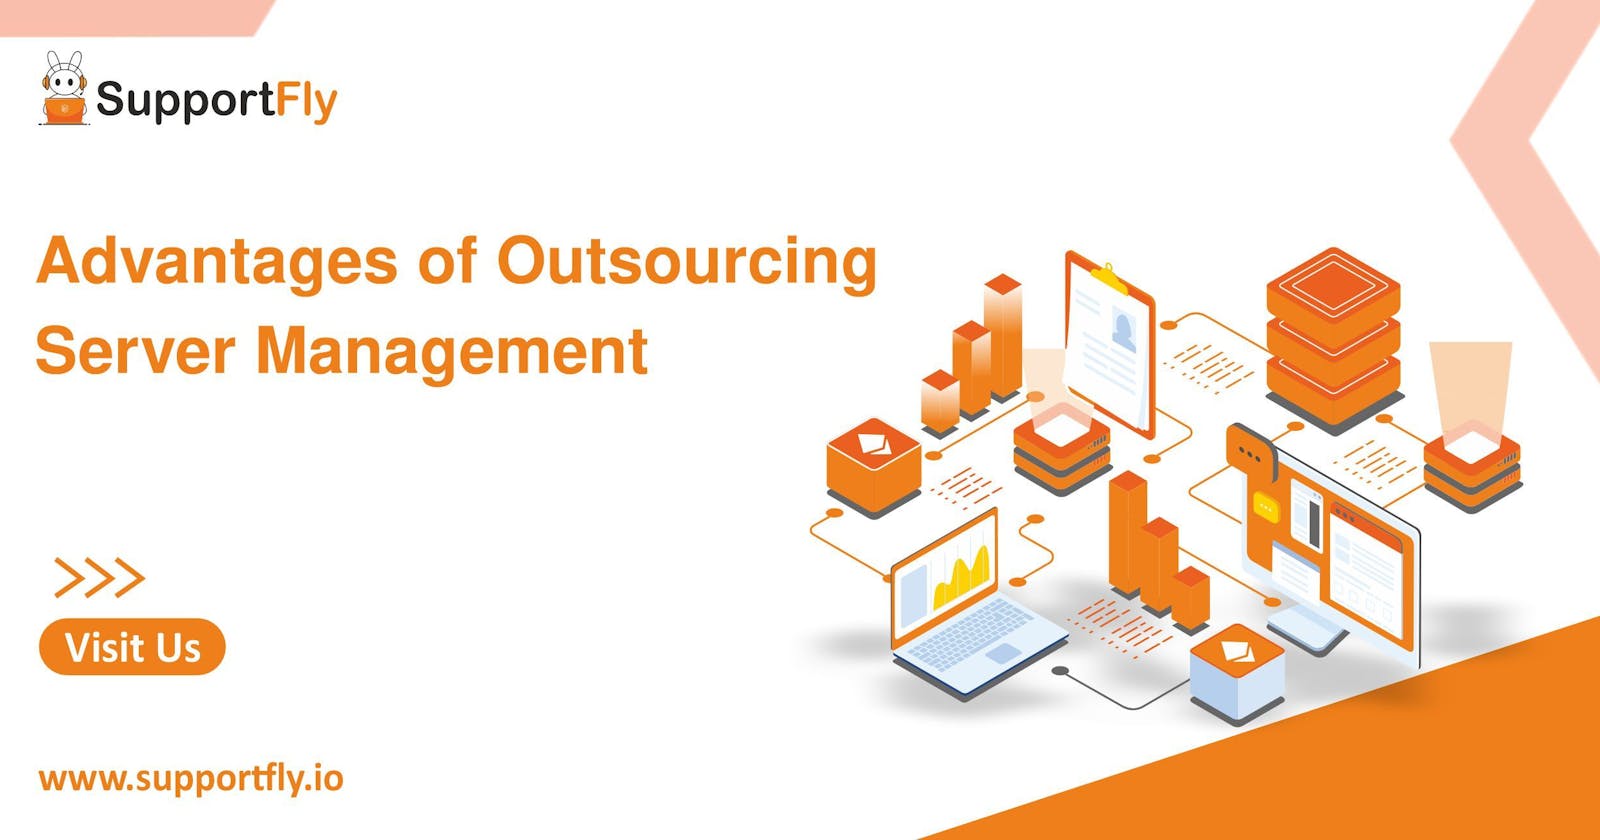 The Advantages of Outsourcing Server Management